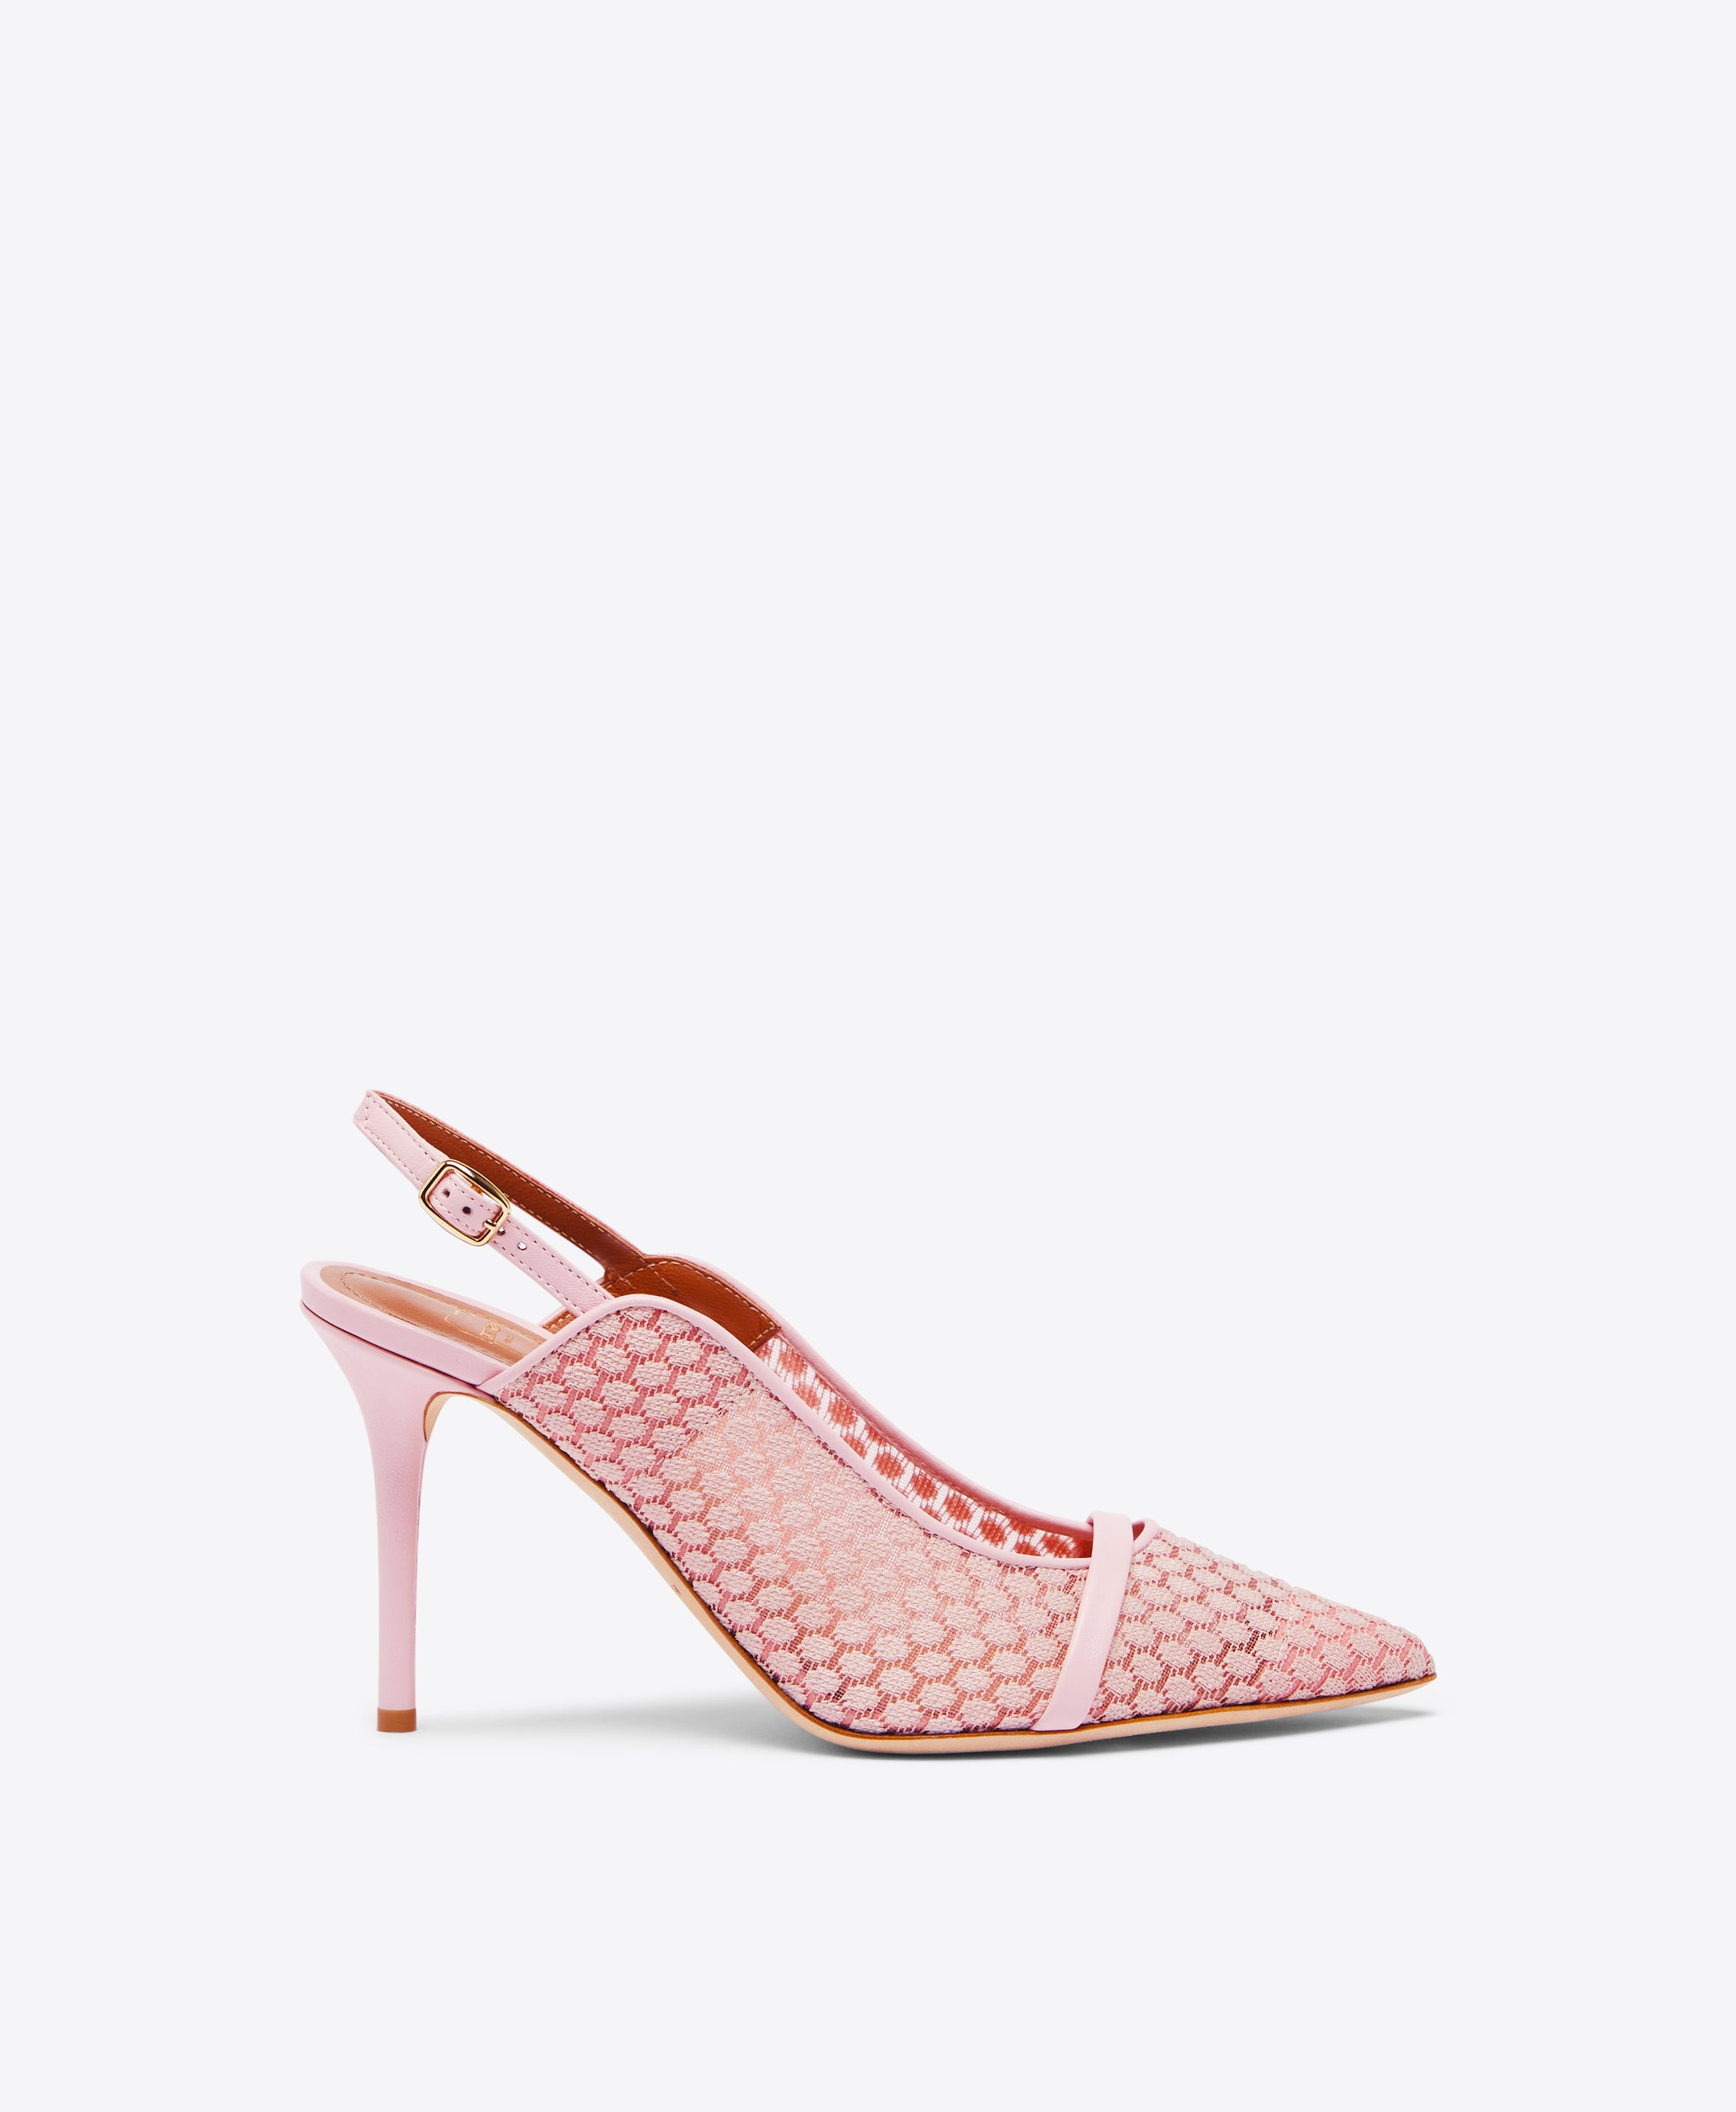 Malone Souliers Marion 85mm Light Pink Lace Mesh Slingback Heels